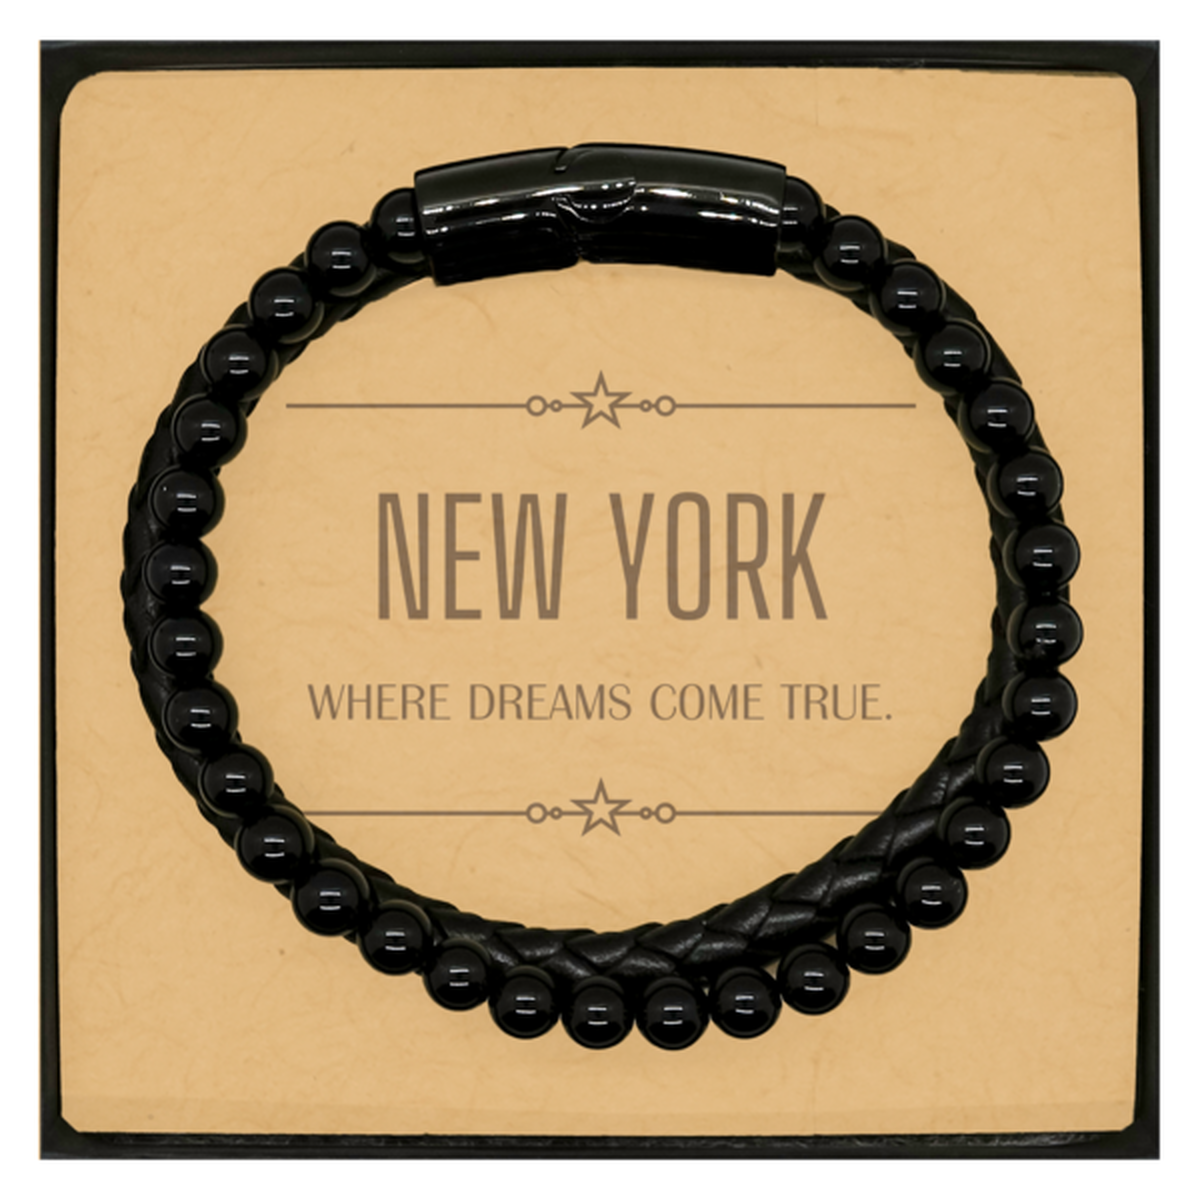 Love New York State Stone Leather Bracelets, New York Where dreams come true, Birthday Christmas Inspirational Gifts For New York Men, Women, Friends